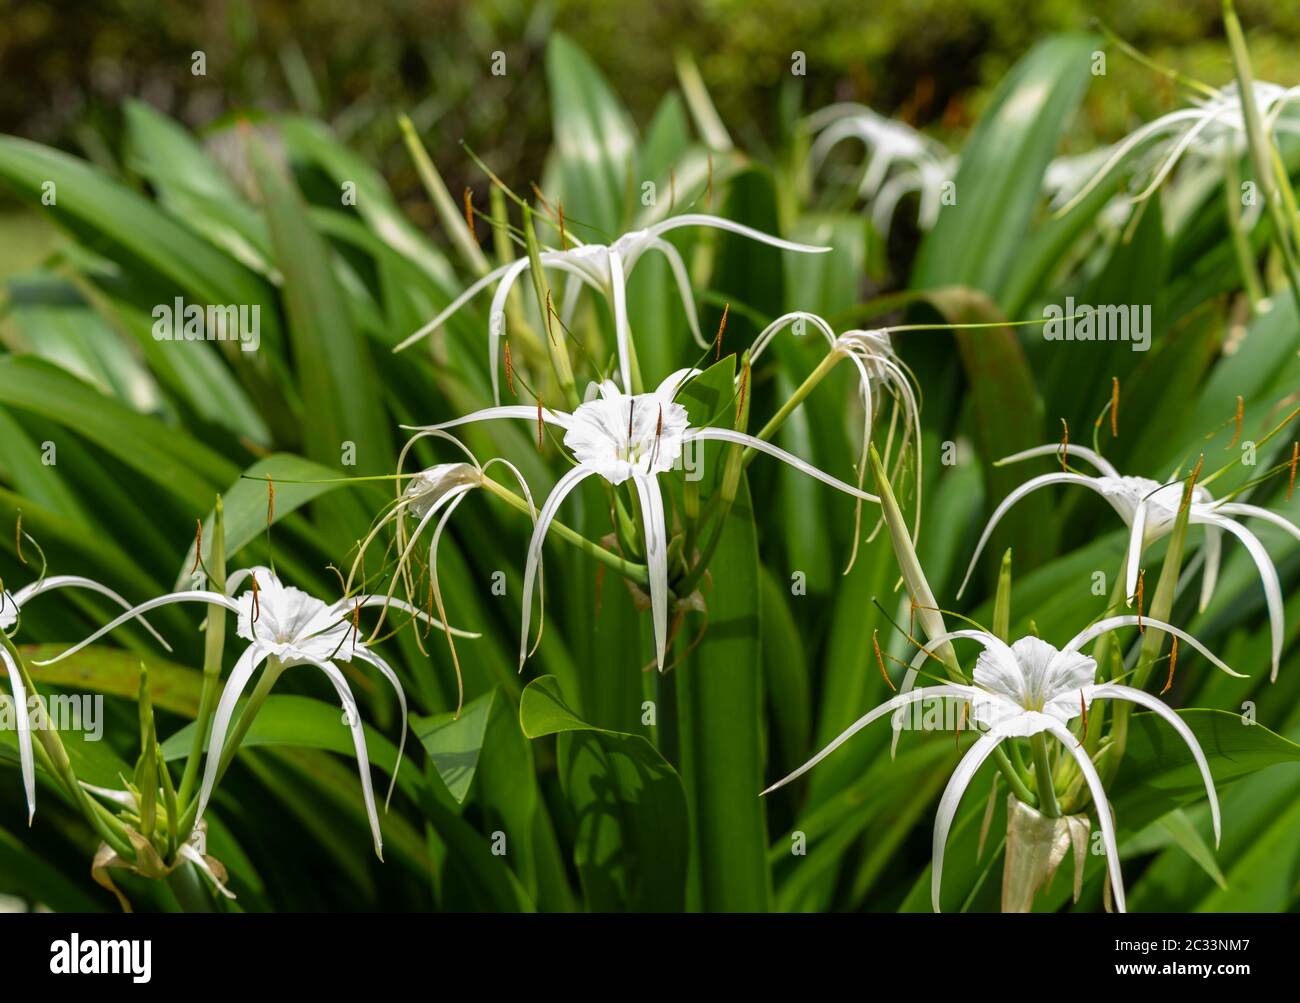 Showy white spider lilies with natural green leaves backdrop Stock Photo